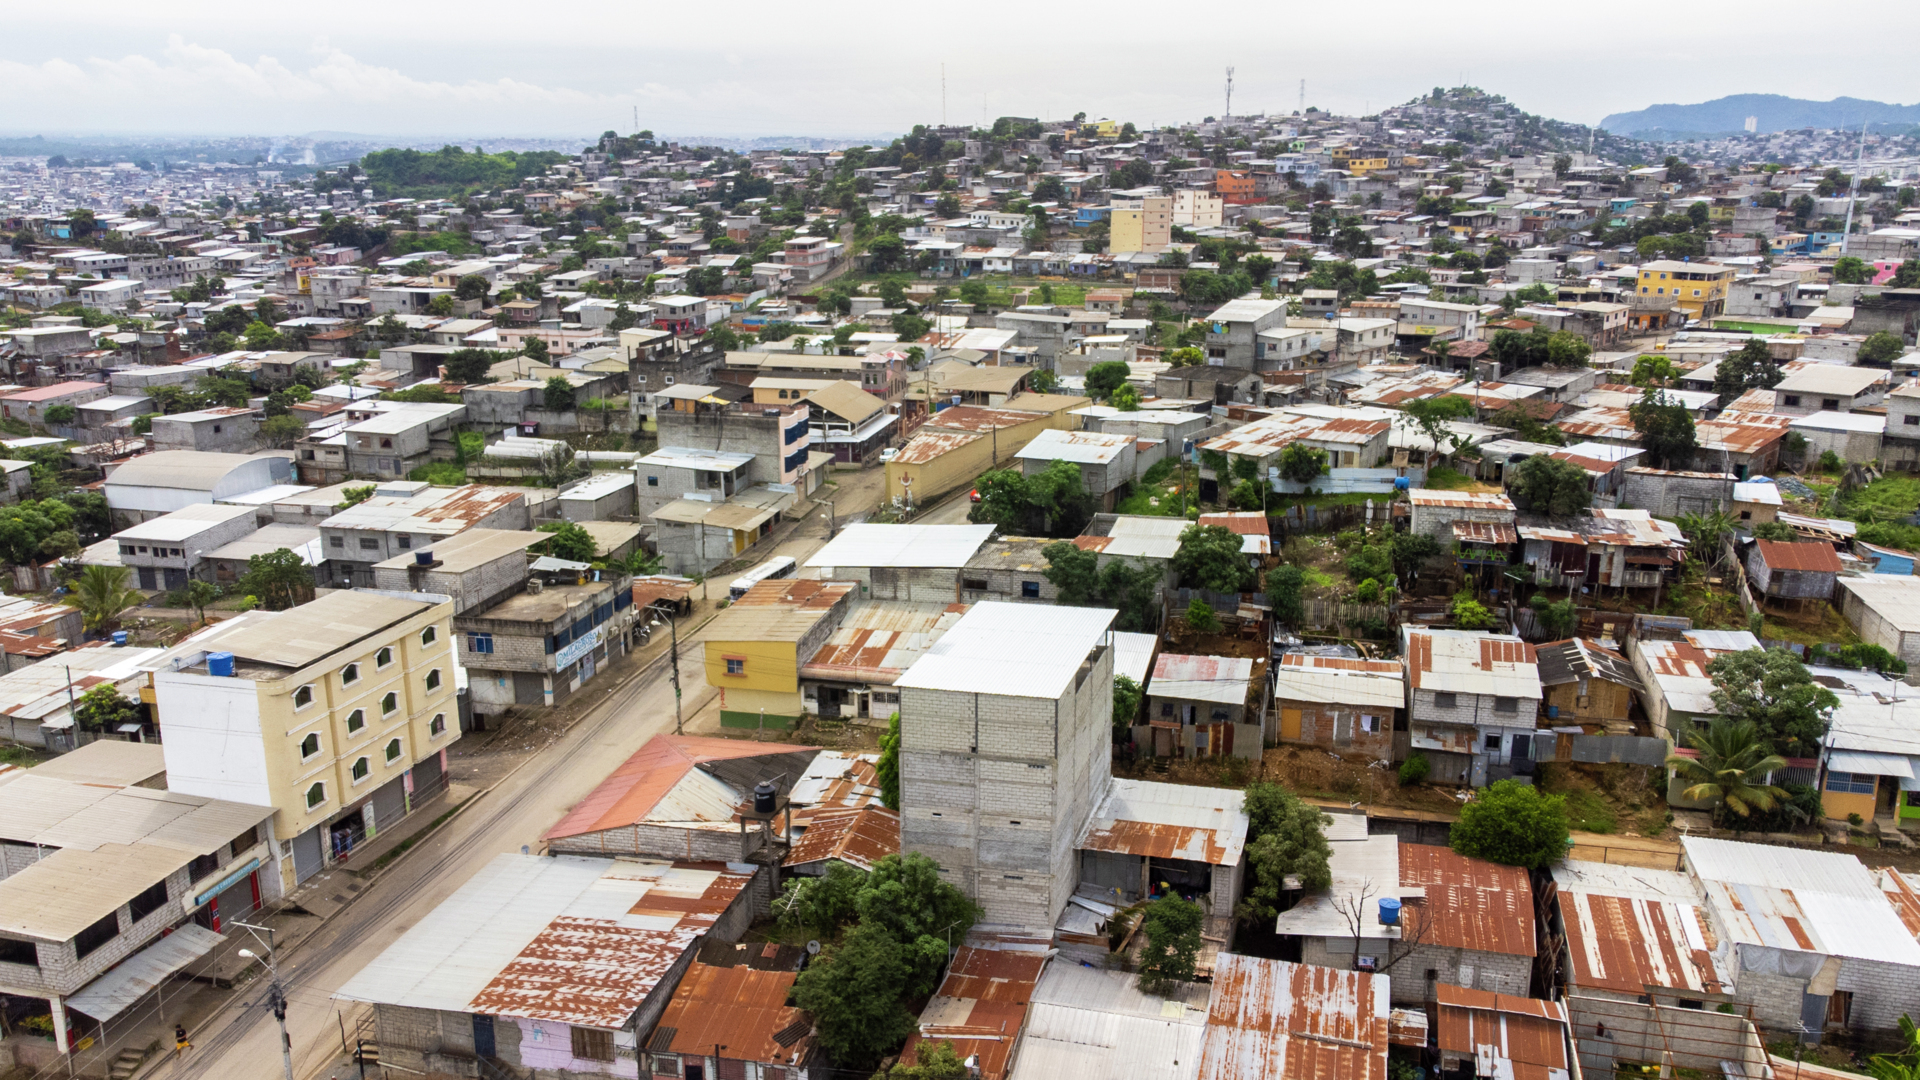 Areal picture of "the zone" in Guayaquil, areas most heavily affected by increased violence.